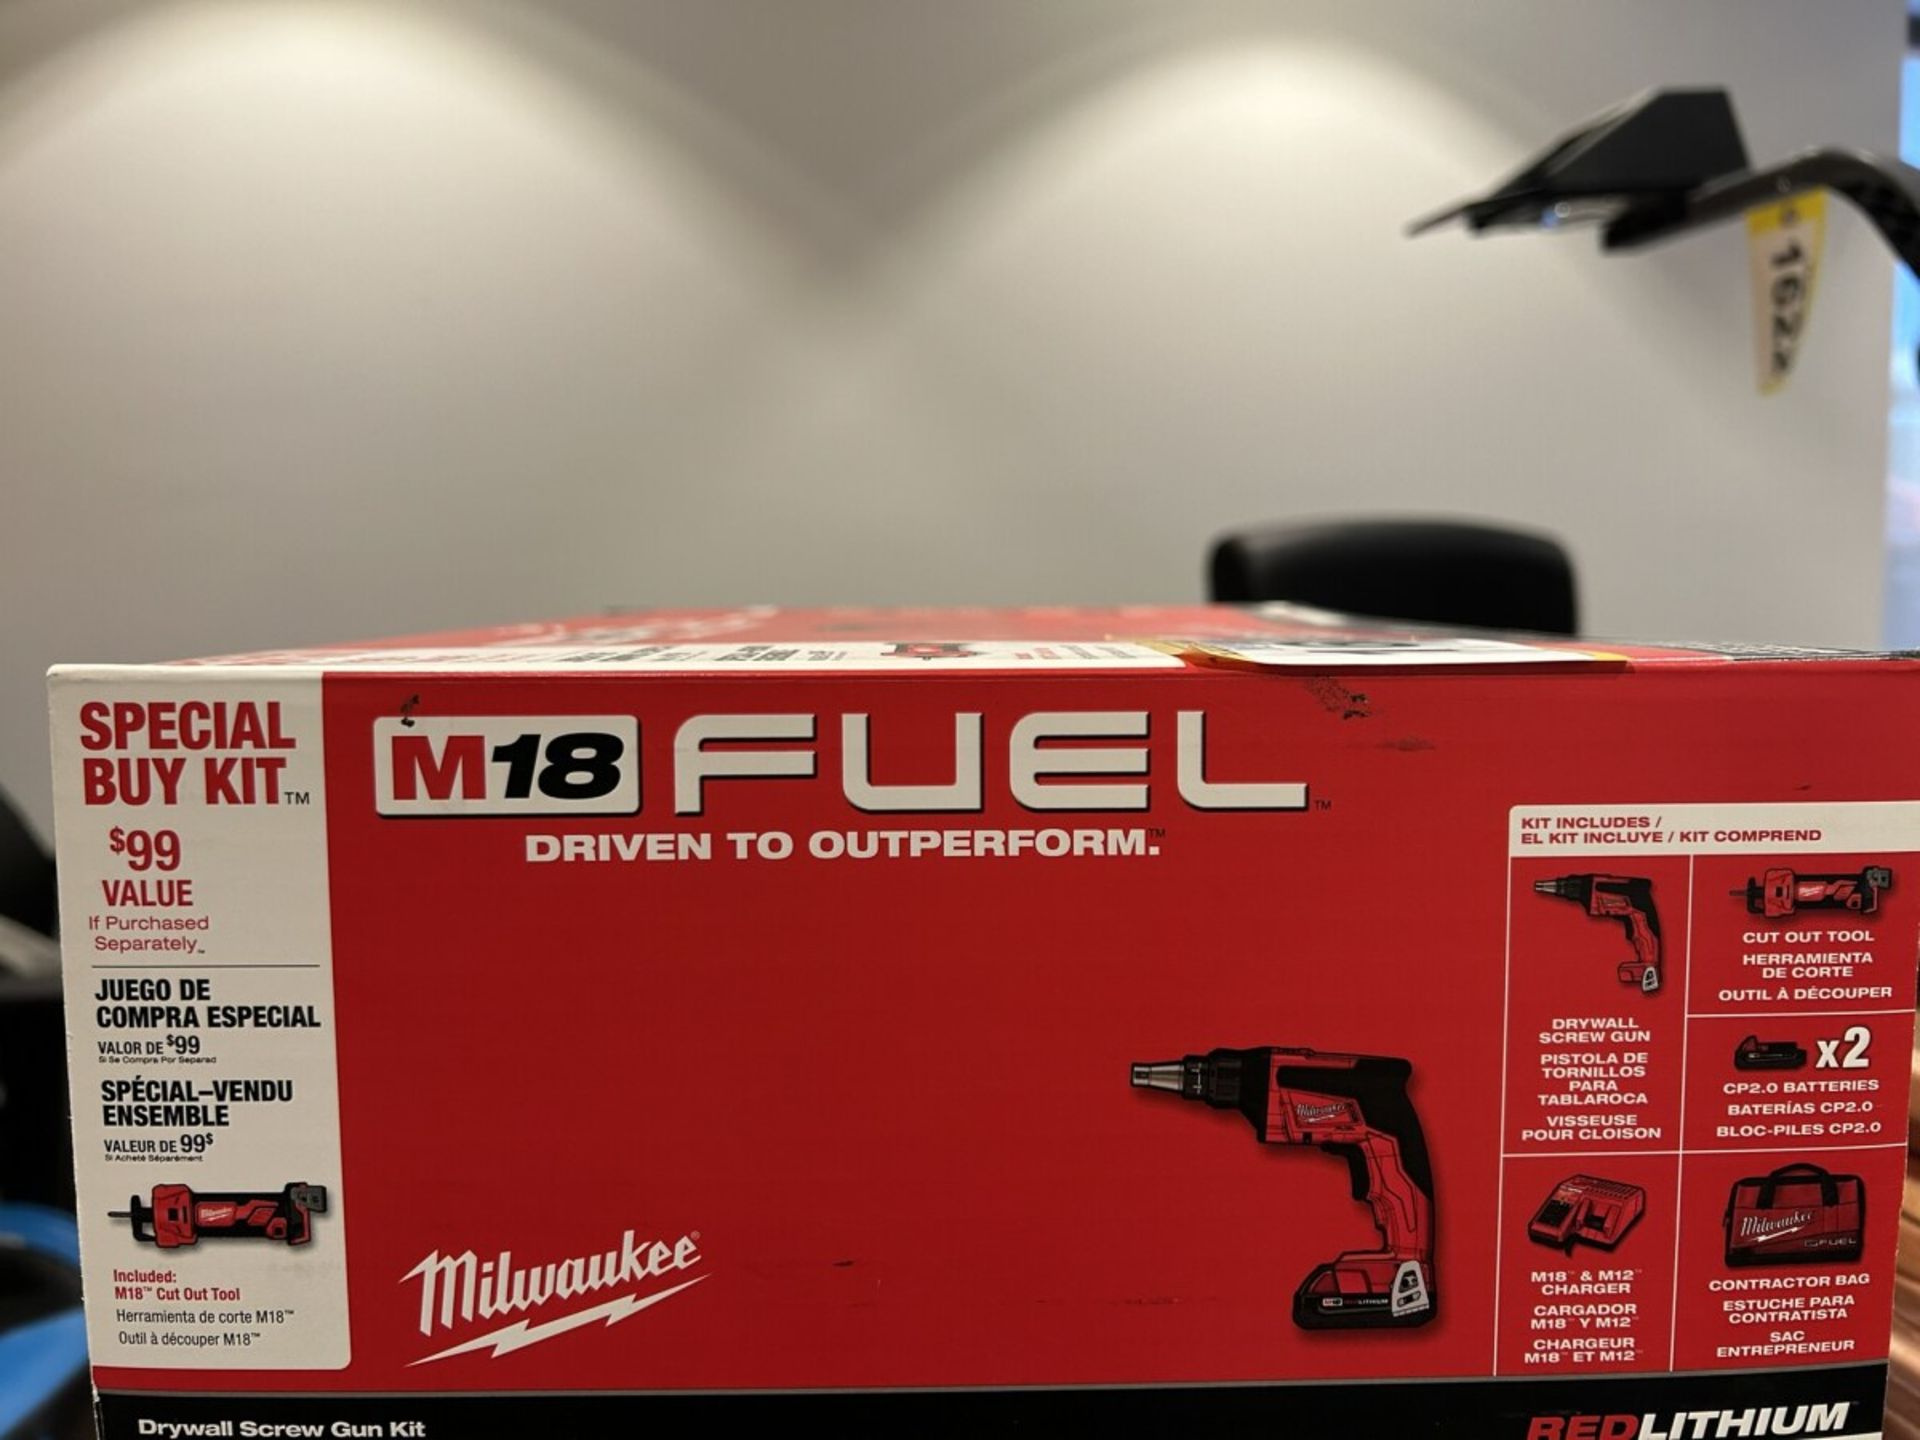 MILWAUKEE M18 FUEL CORDLESS SCREW GUN AND CUT OUT TOOL W/ 2 BATTERIES AND CHARGER (NEW IN BOX) - Image 3 of 3